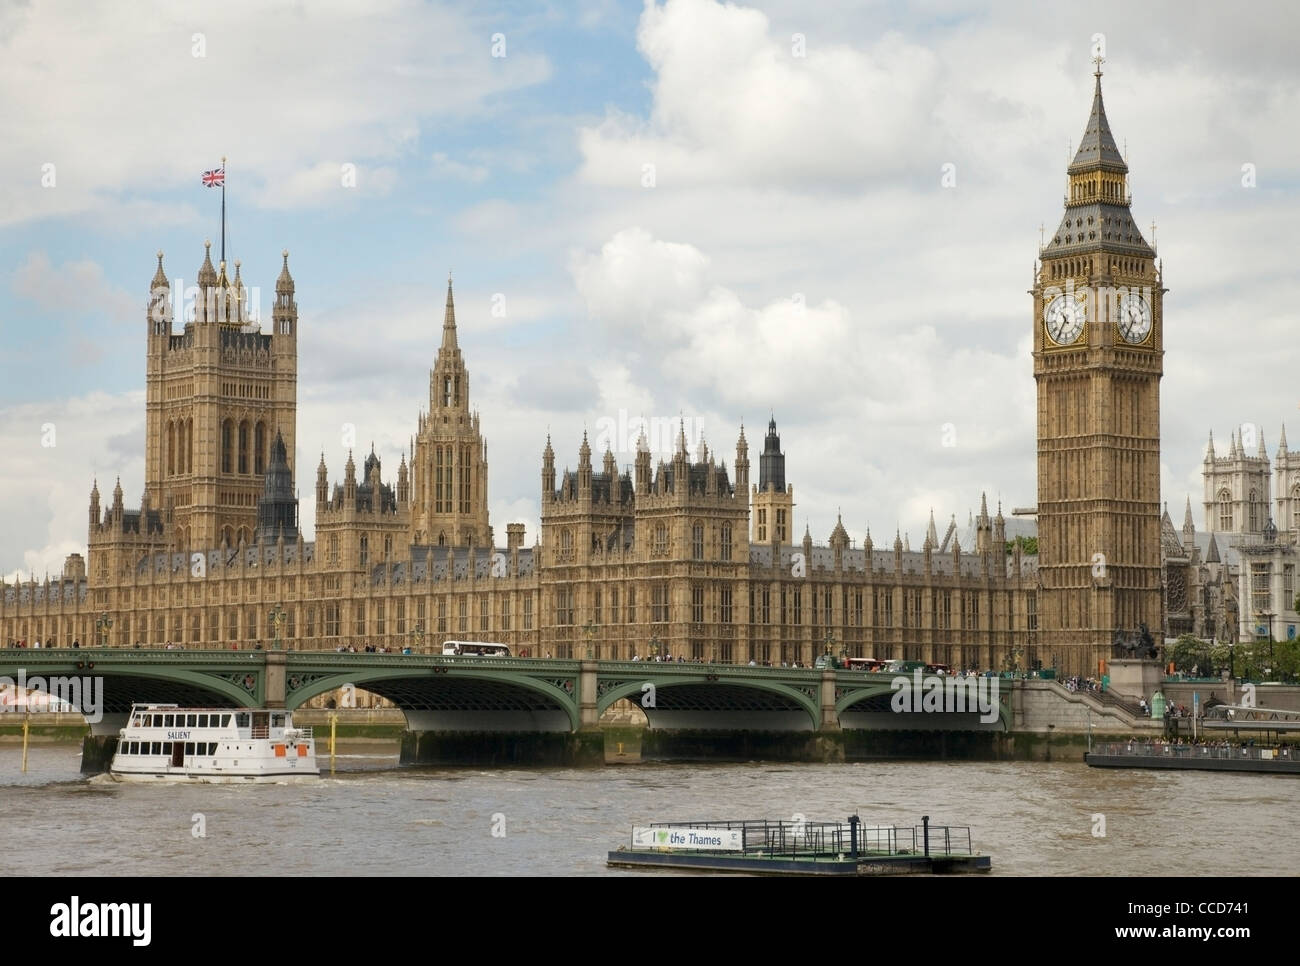 A view of Houses of Parliament and Westminster Bridge from across the River Thames in London, England. Stock Photo